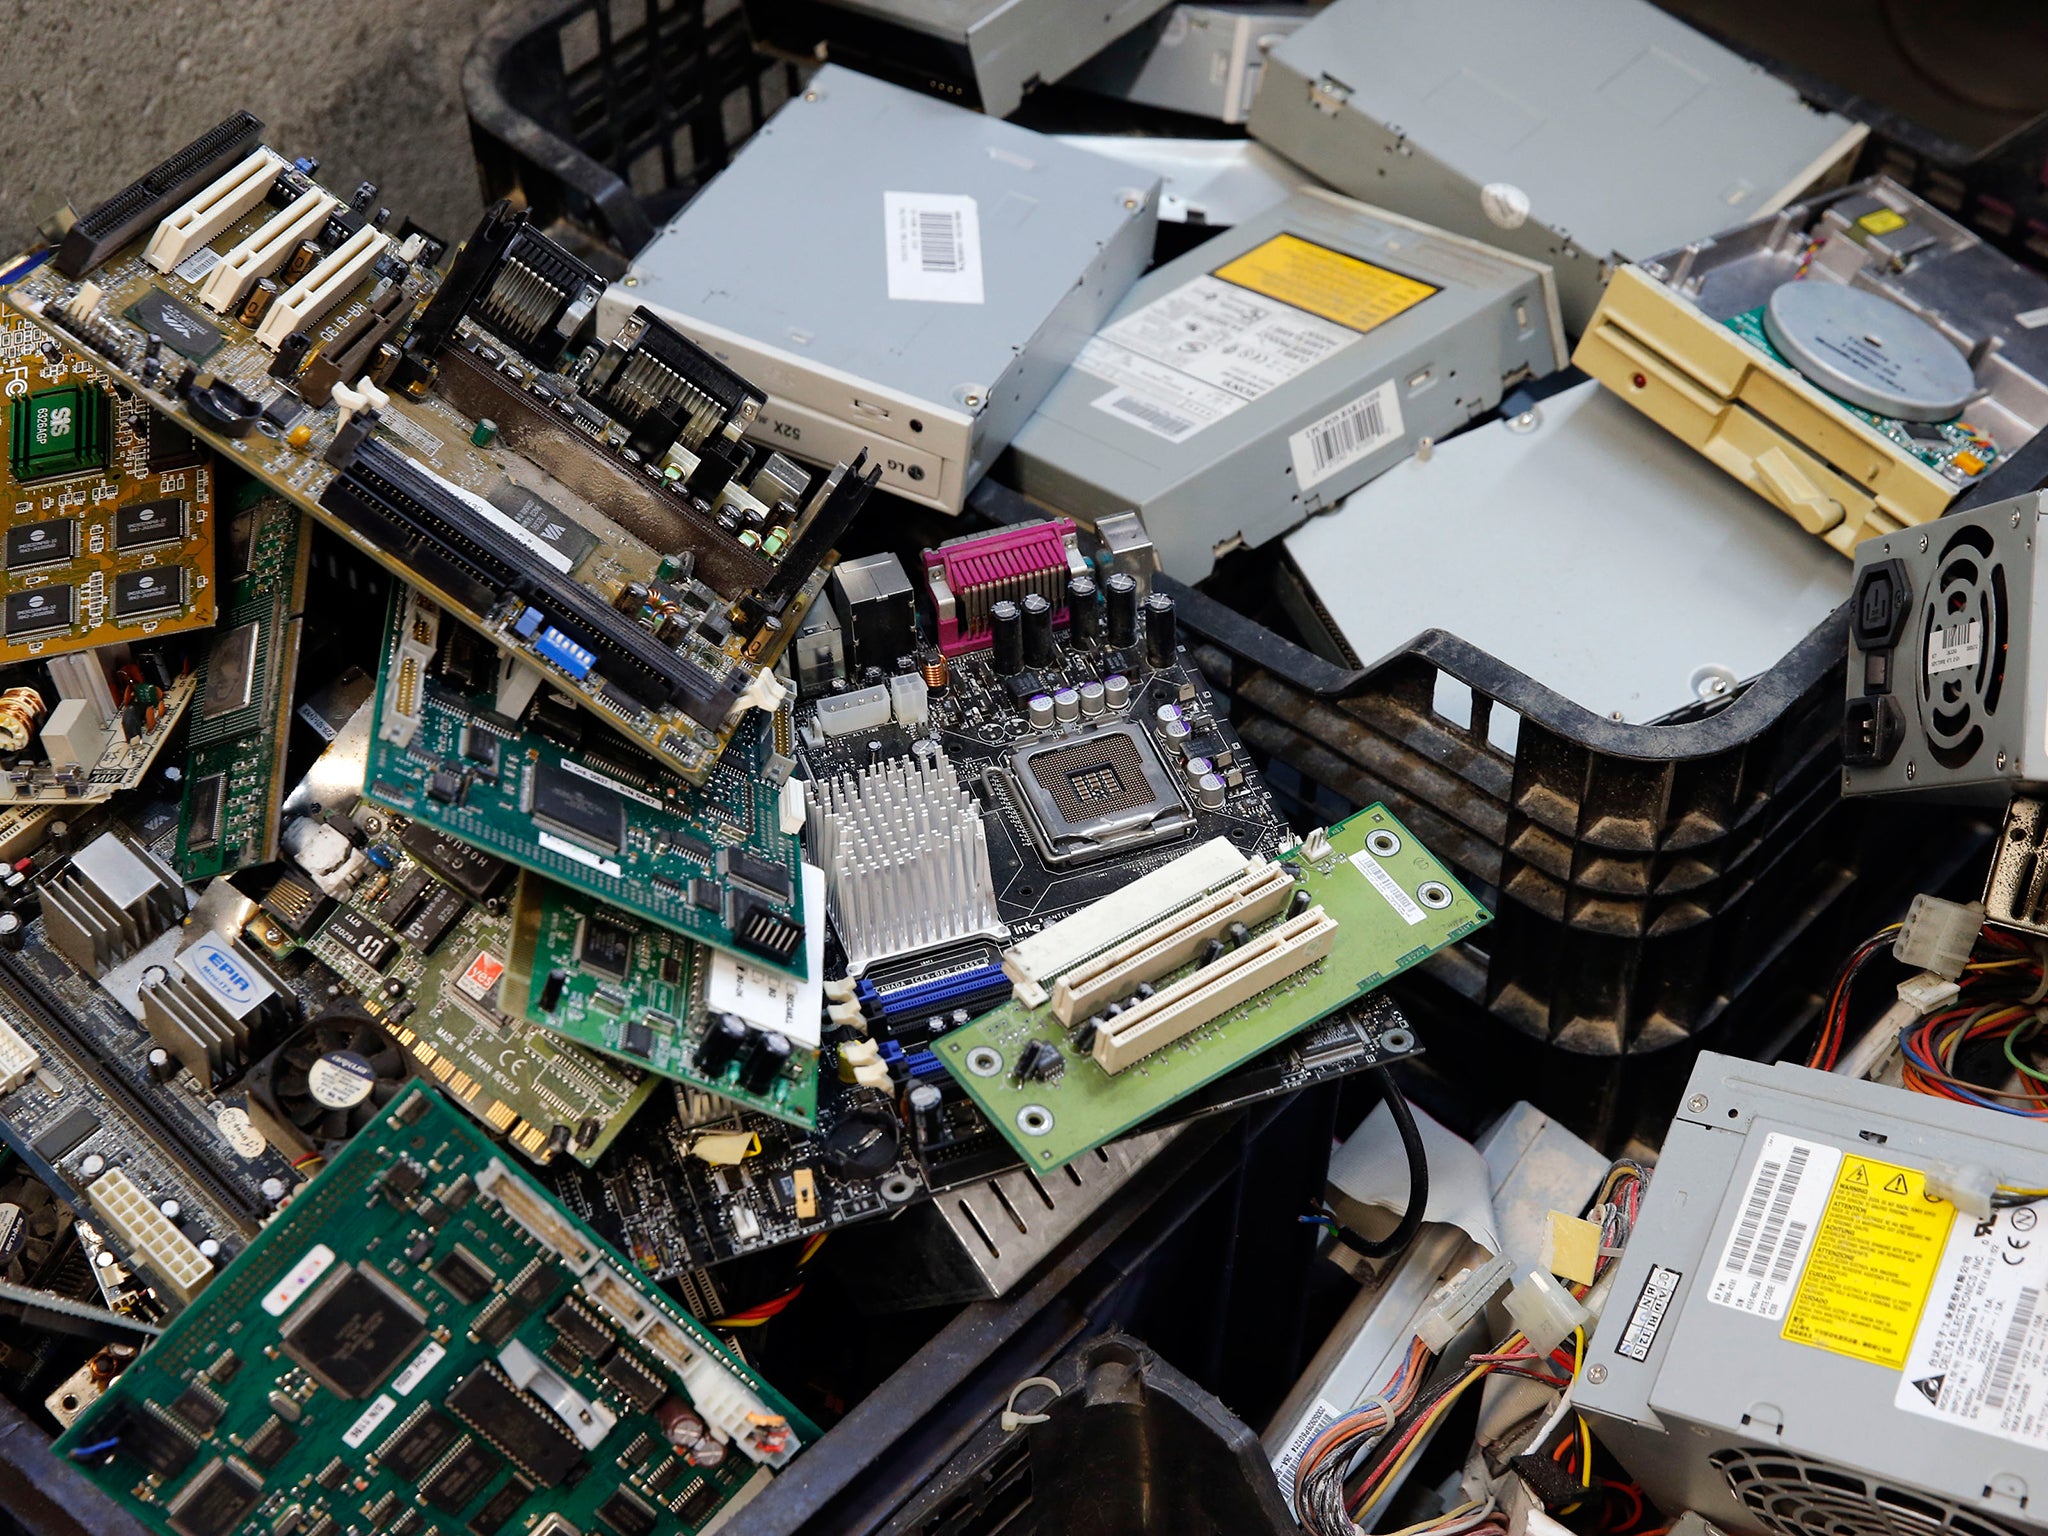 The total weight of the world’s e-waste for 2014 is 41.8 million tons